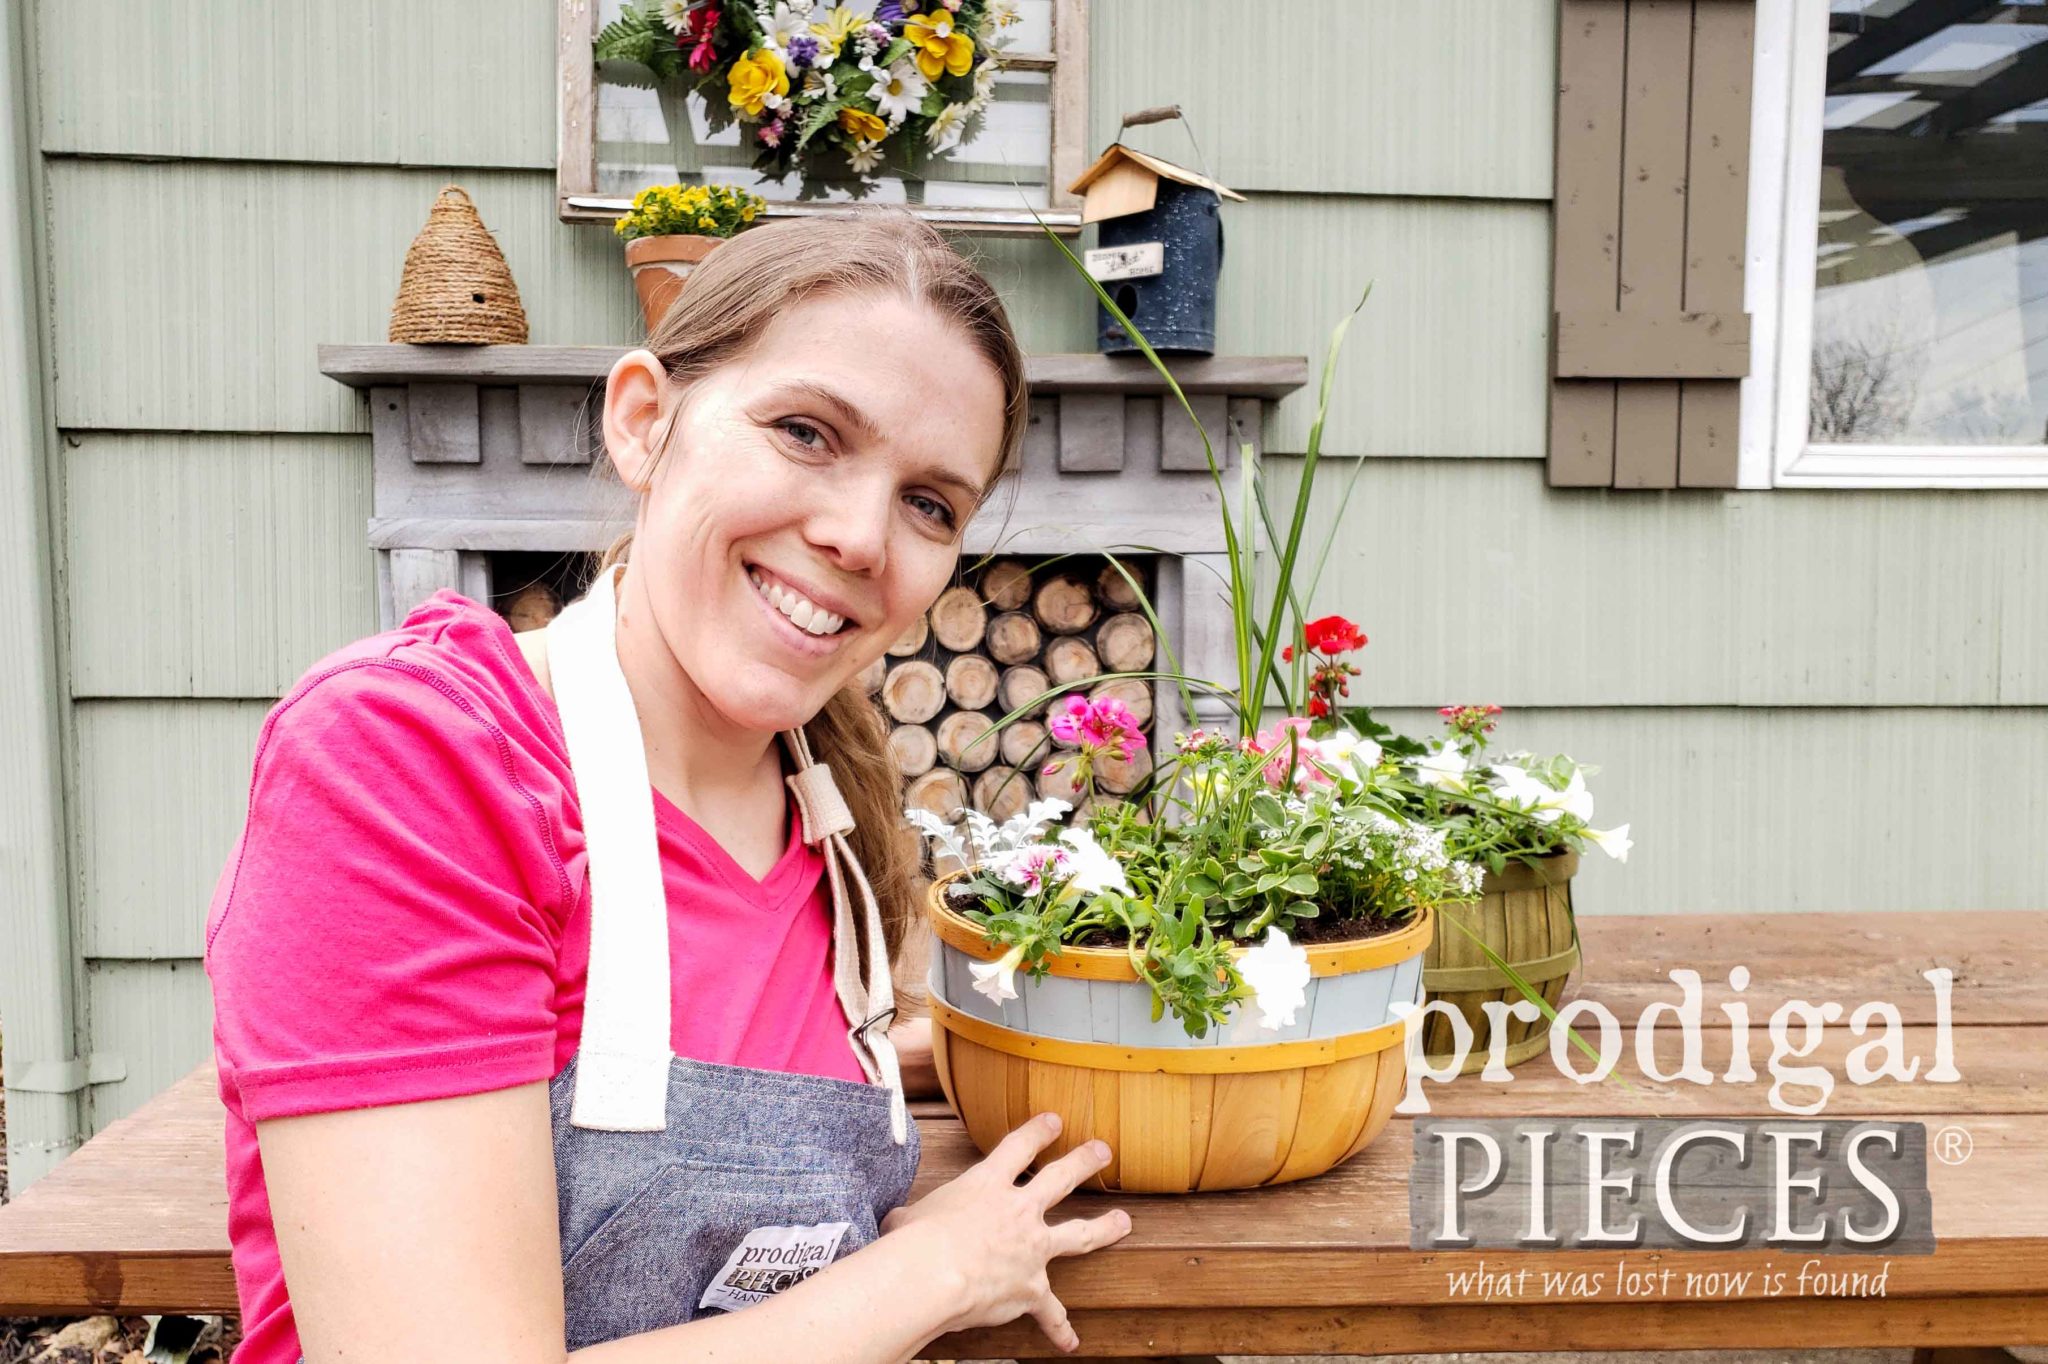 Join Larissa of Prodigal Pieces as she shows you how to make this easy & affordable Mothers Day Flower Basket | Give the gift of blooms! | Video Tutorial at prodigalpieces.com #prodigalpieces #diy #mothersday #giftideas #flowers #garden #home #diy